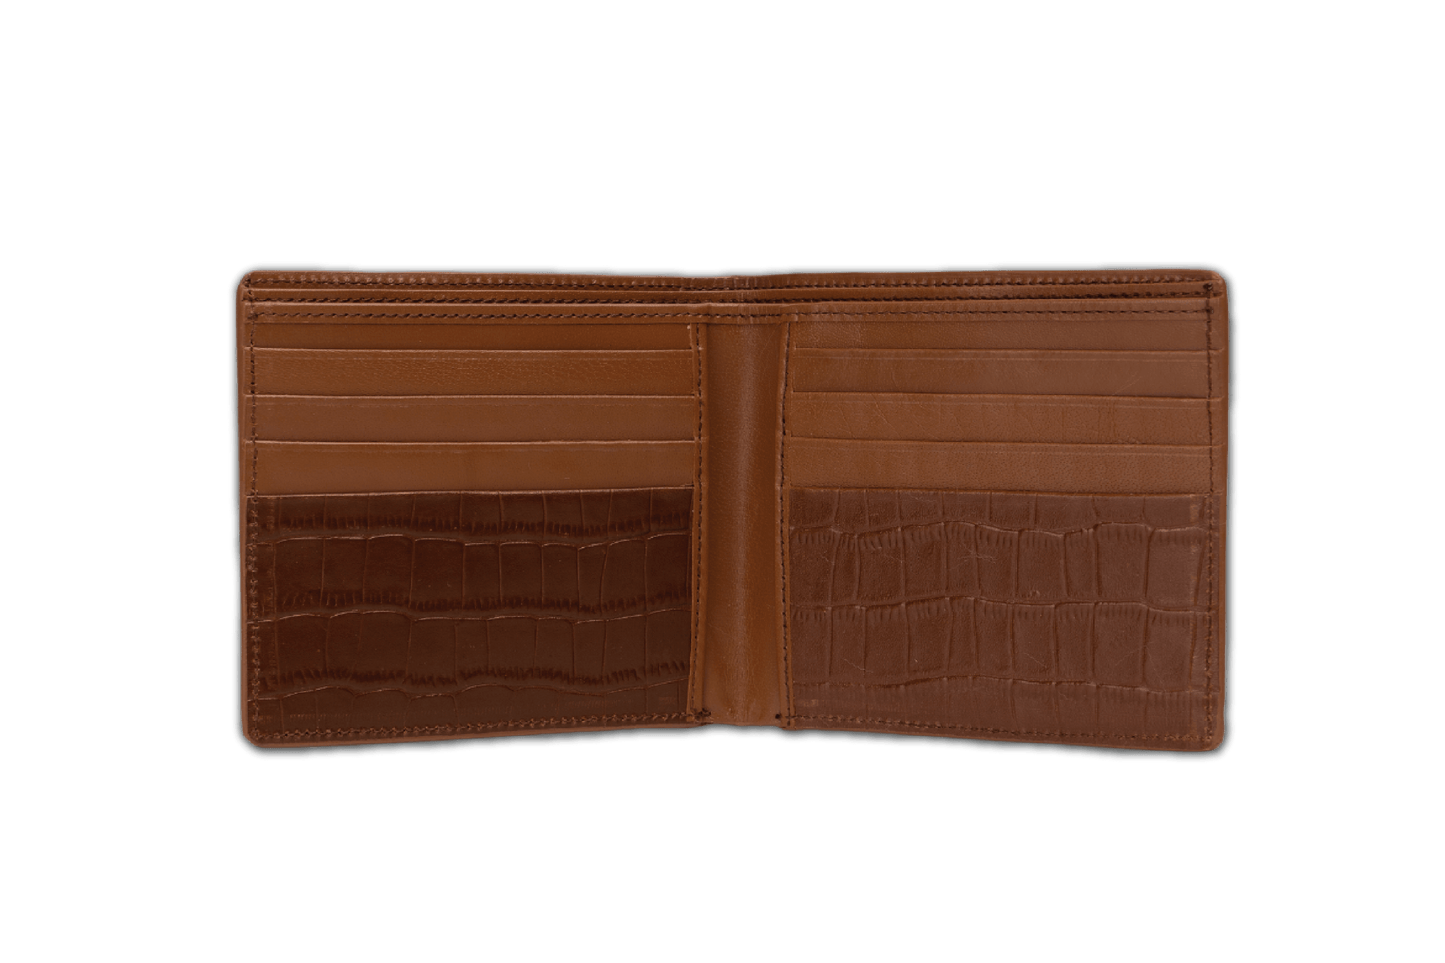 NOTE WALLET NW346 TAN "RFID PROTECTION"